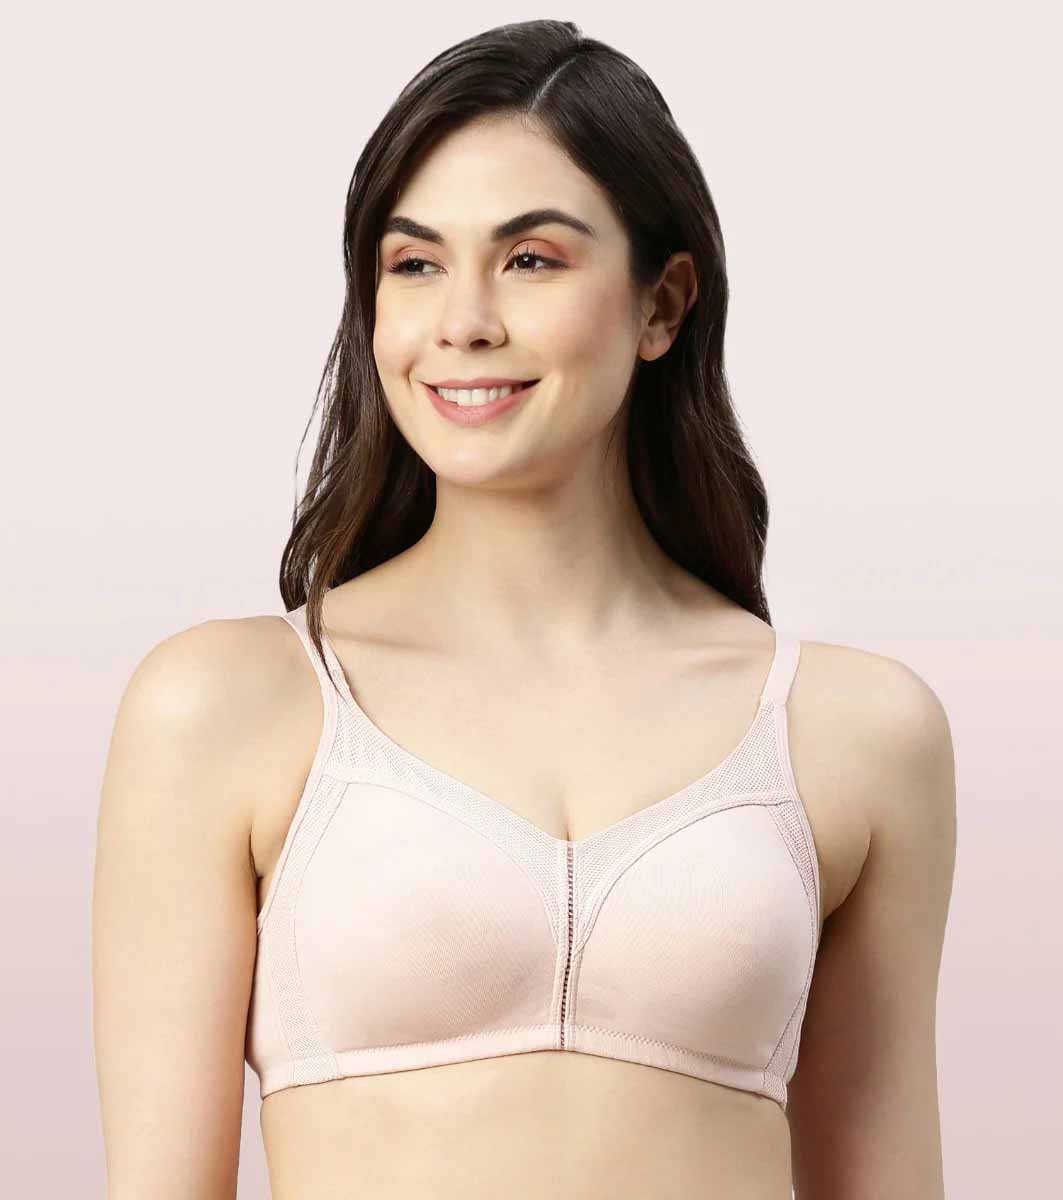 Enamor Perfect Coverage Cotton T-shirt Bra for Women- Padded and Wiref